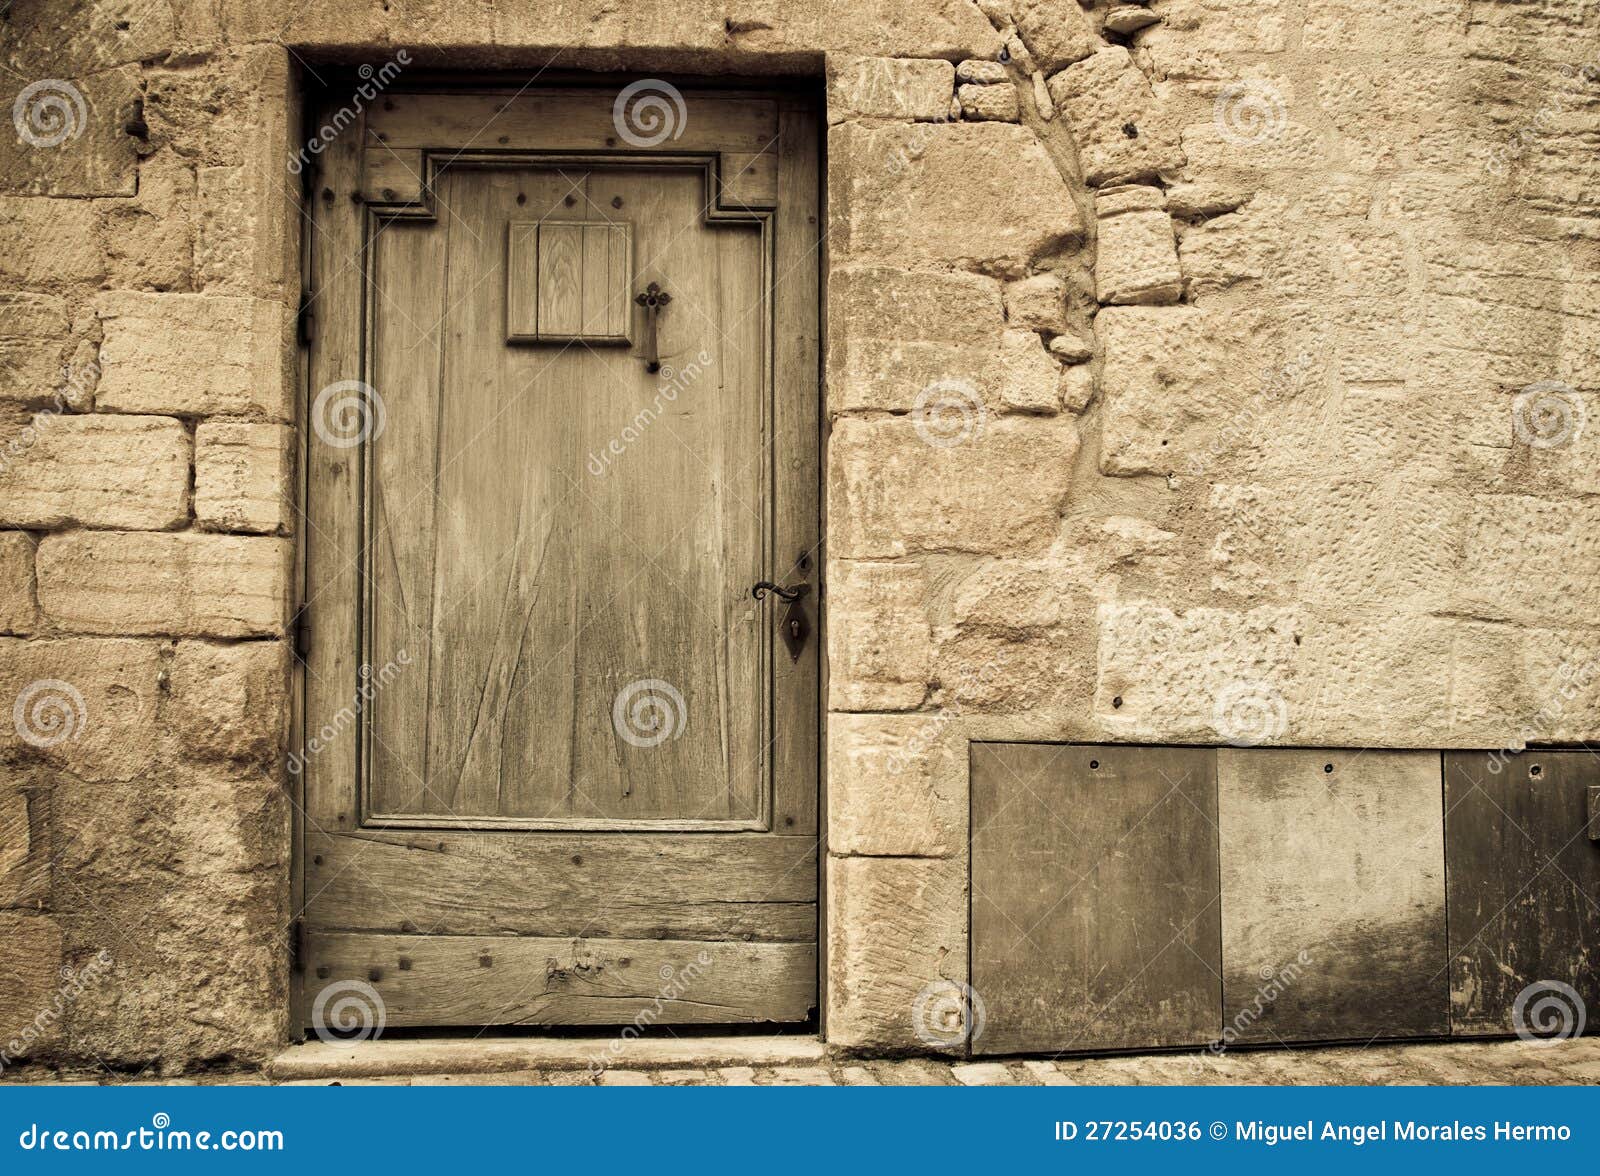 Old gate stock photo. Image of facade, stone, entrance - 27254036